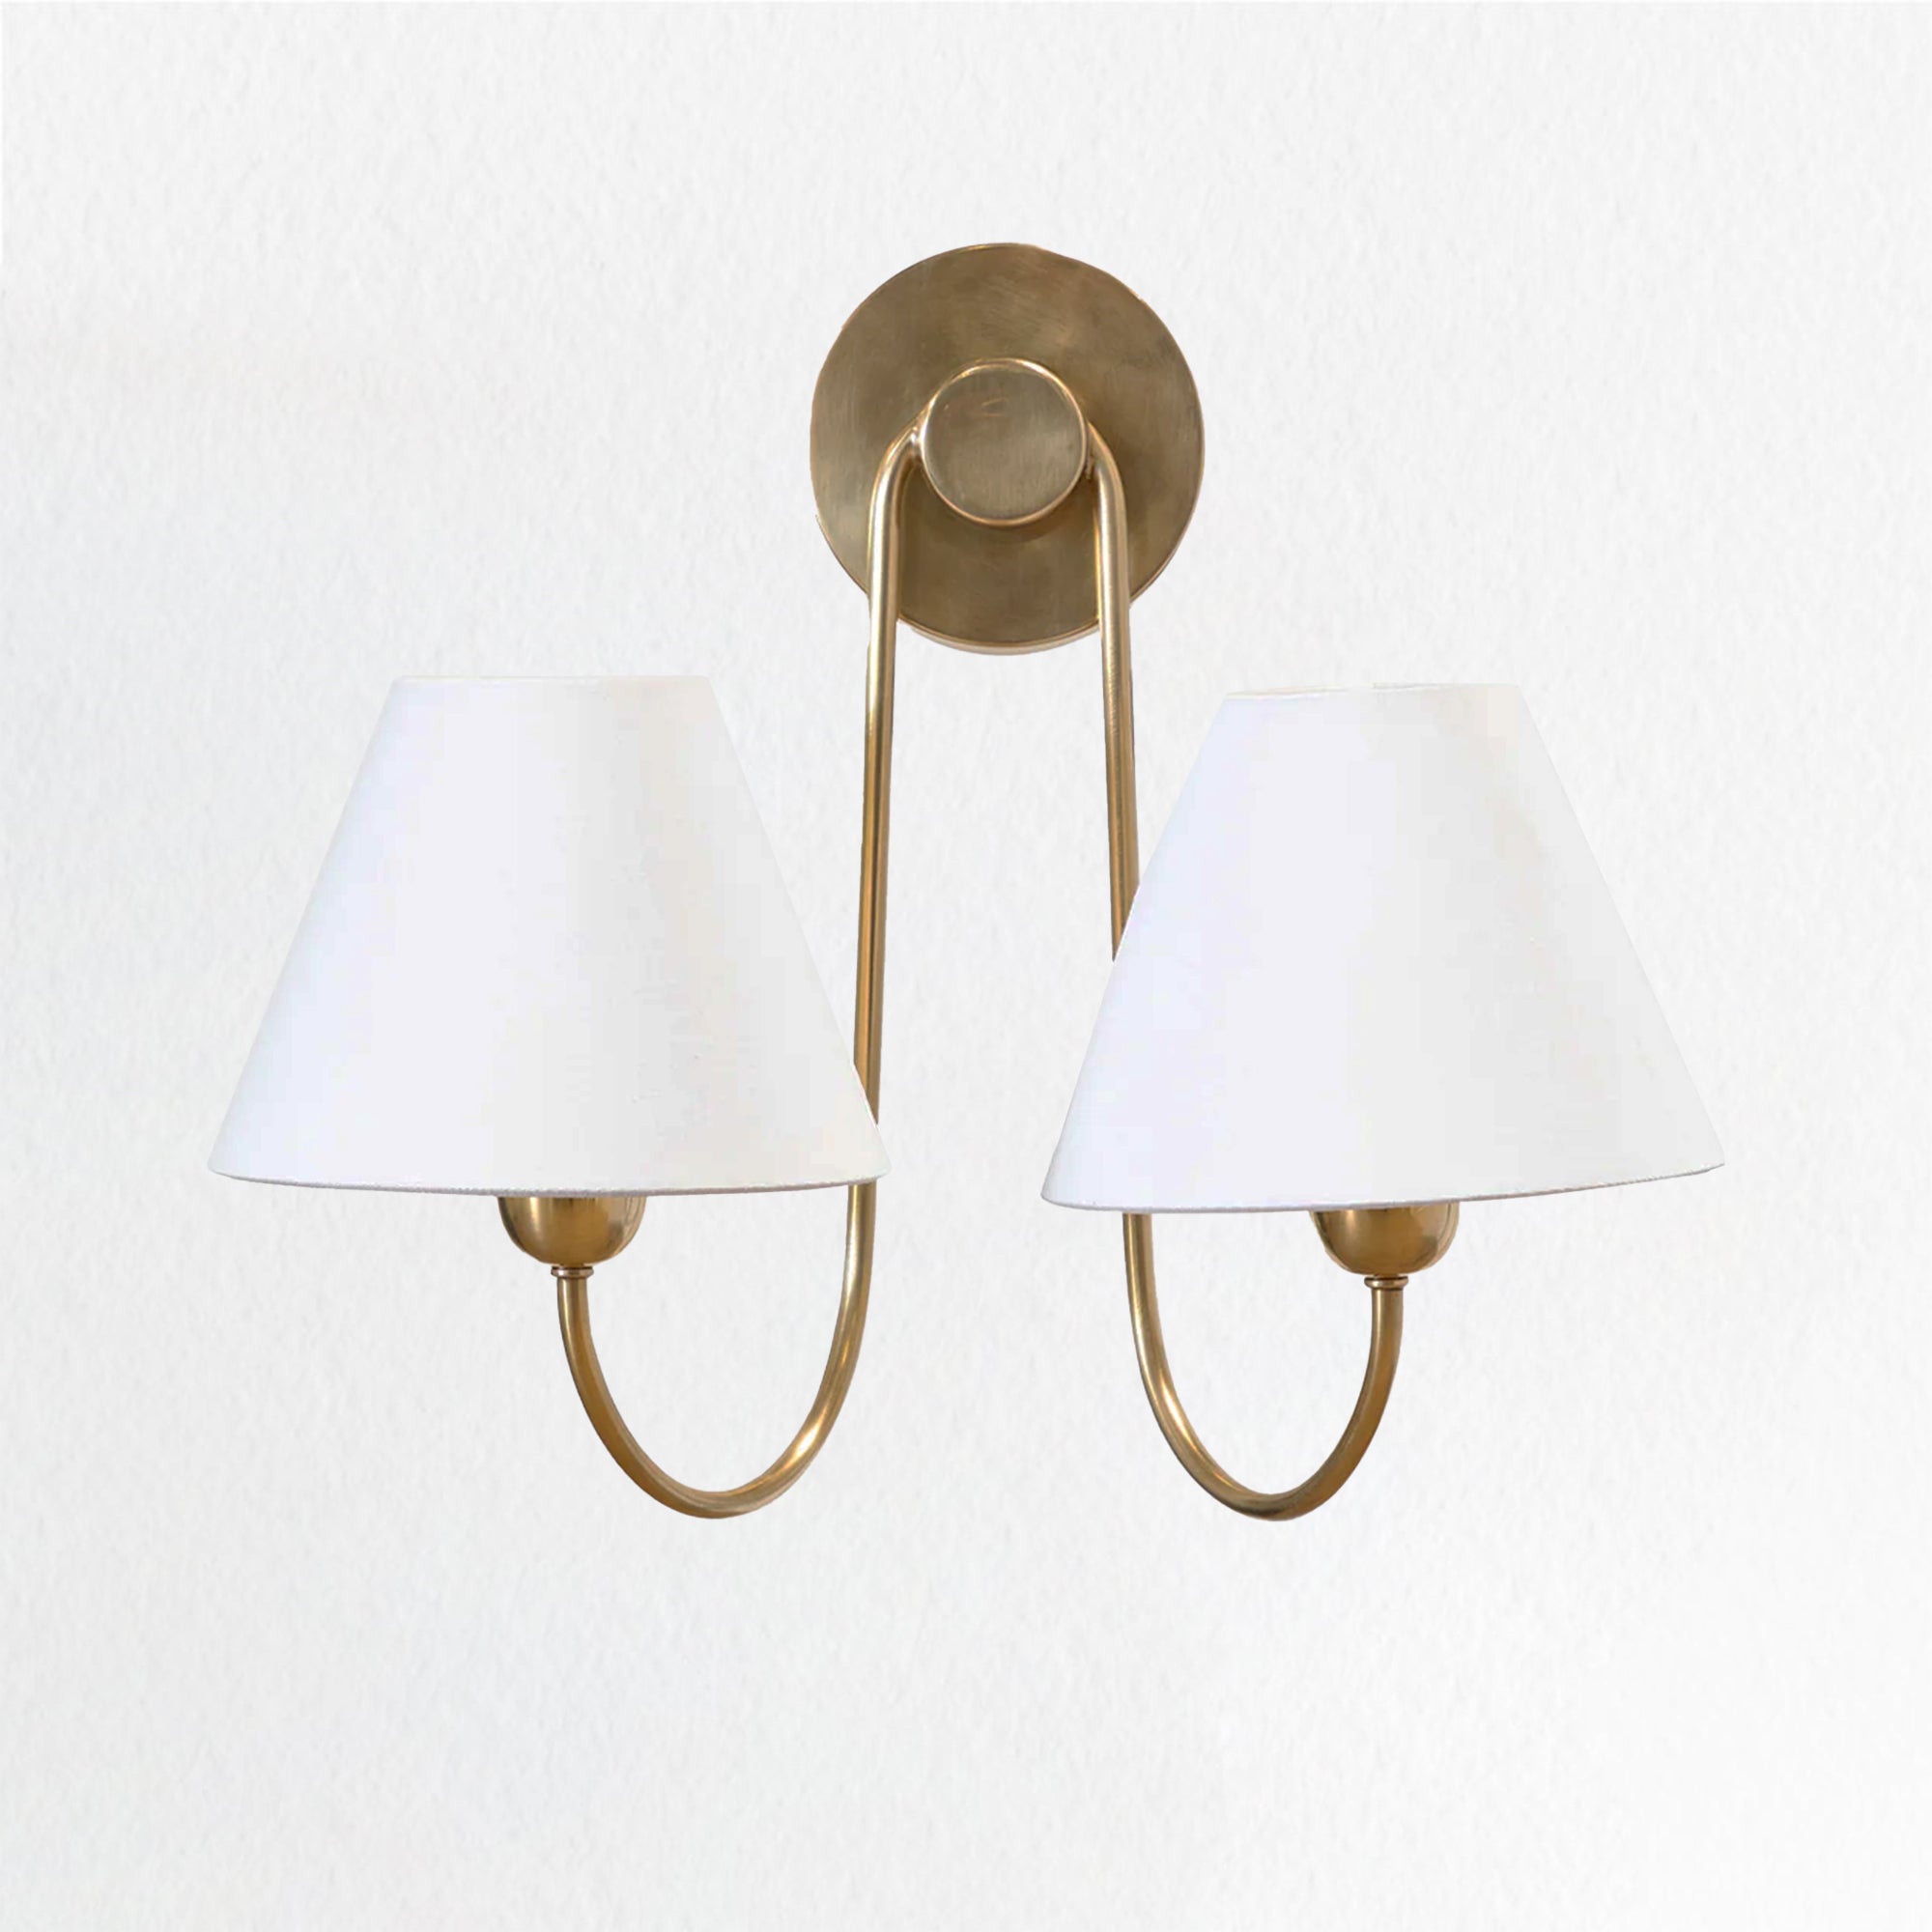 Modern Linen Shade Double Swoop Sconce - Stainless Steel and Oil Brushed Bronze with White Linen Shade - Stylish Moisture Resistant Wall Sconce for Living Room